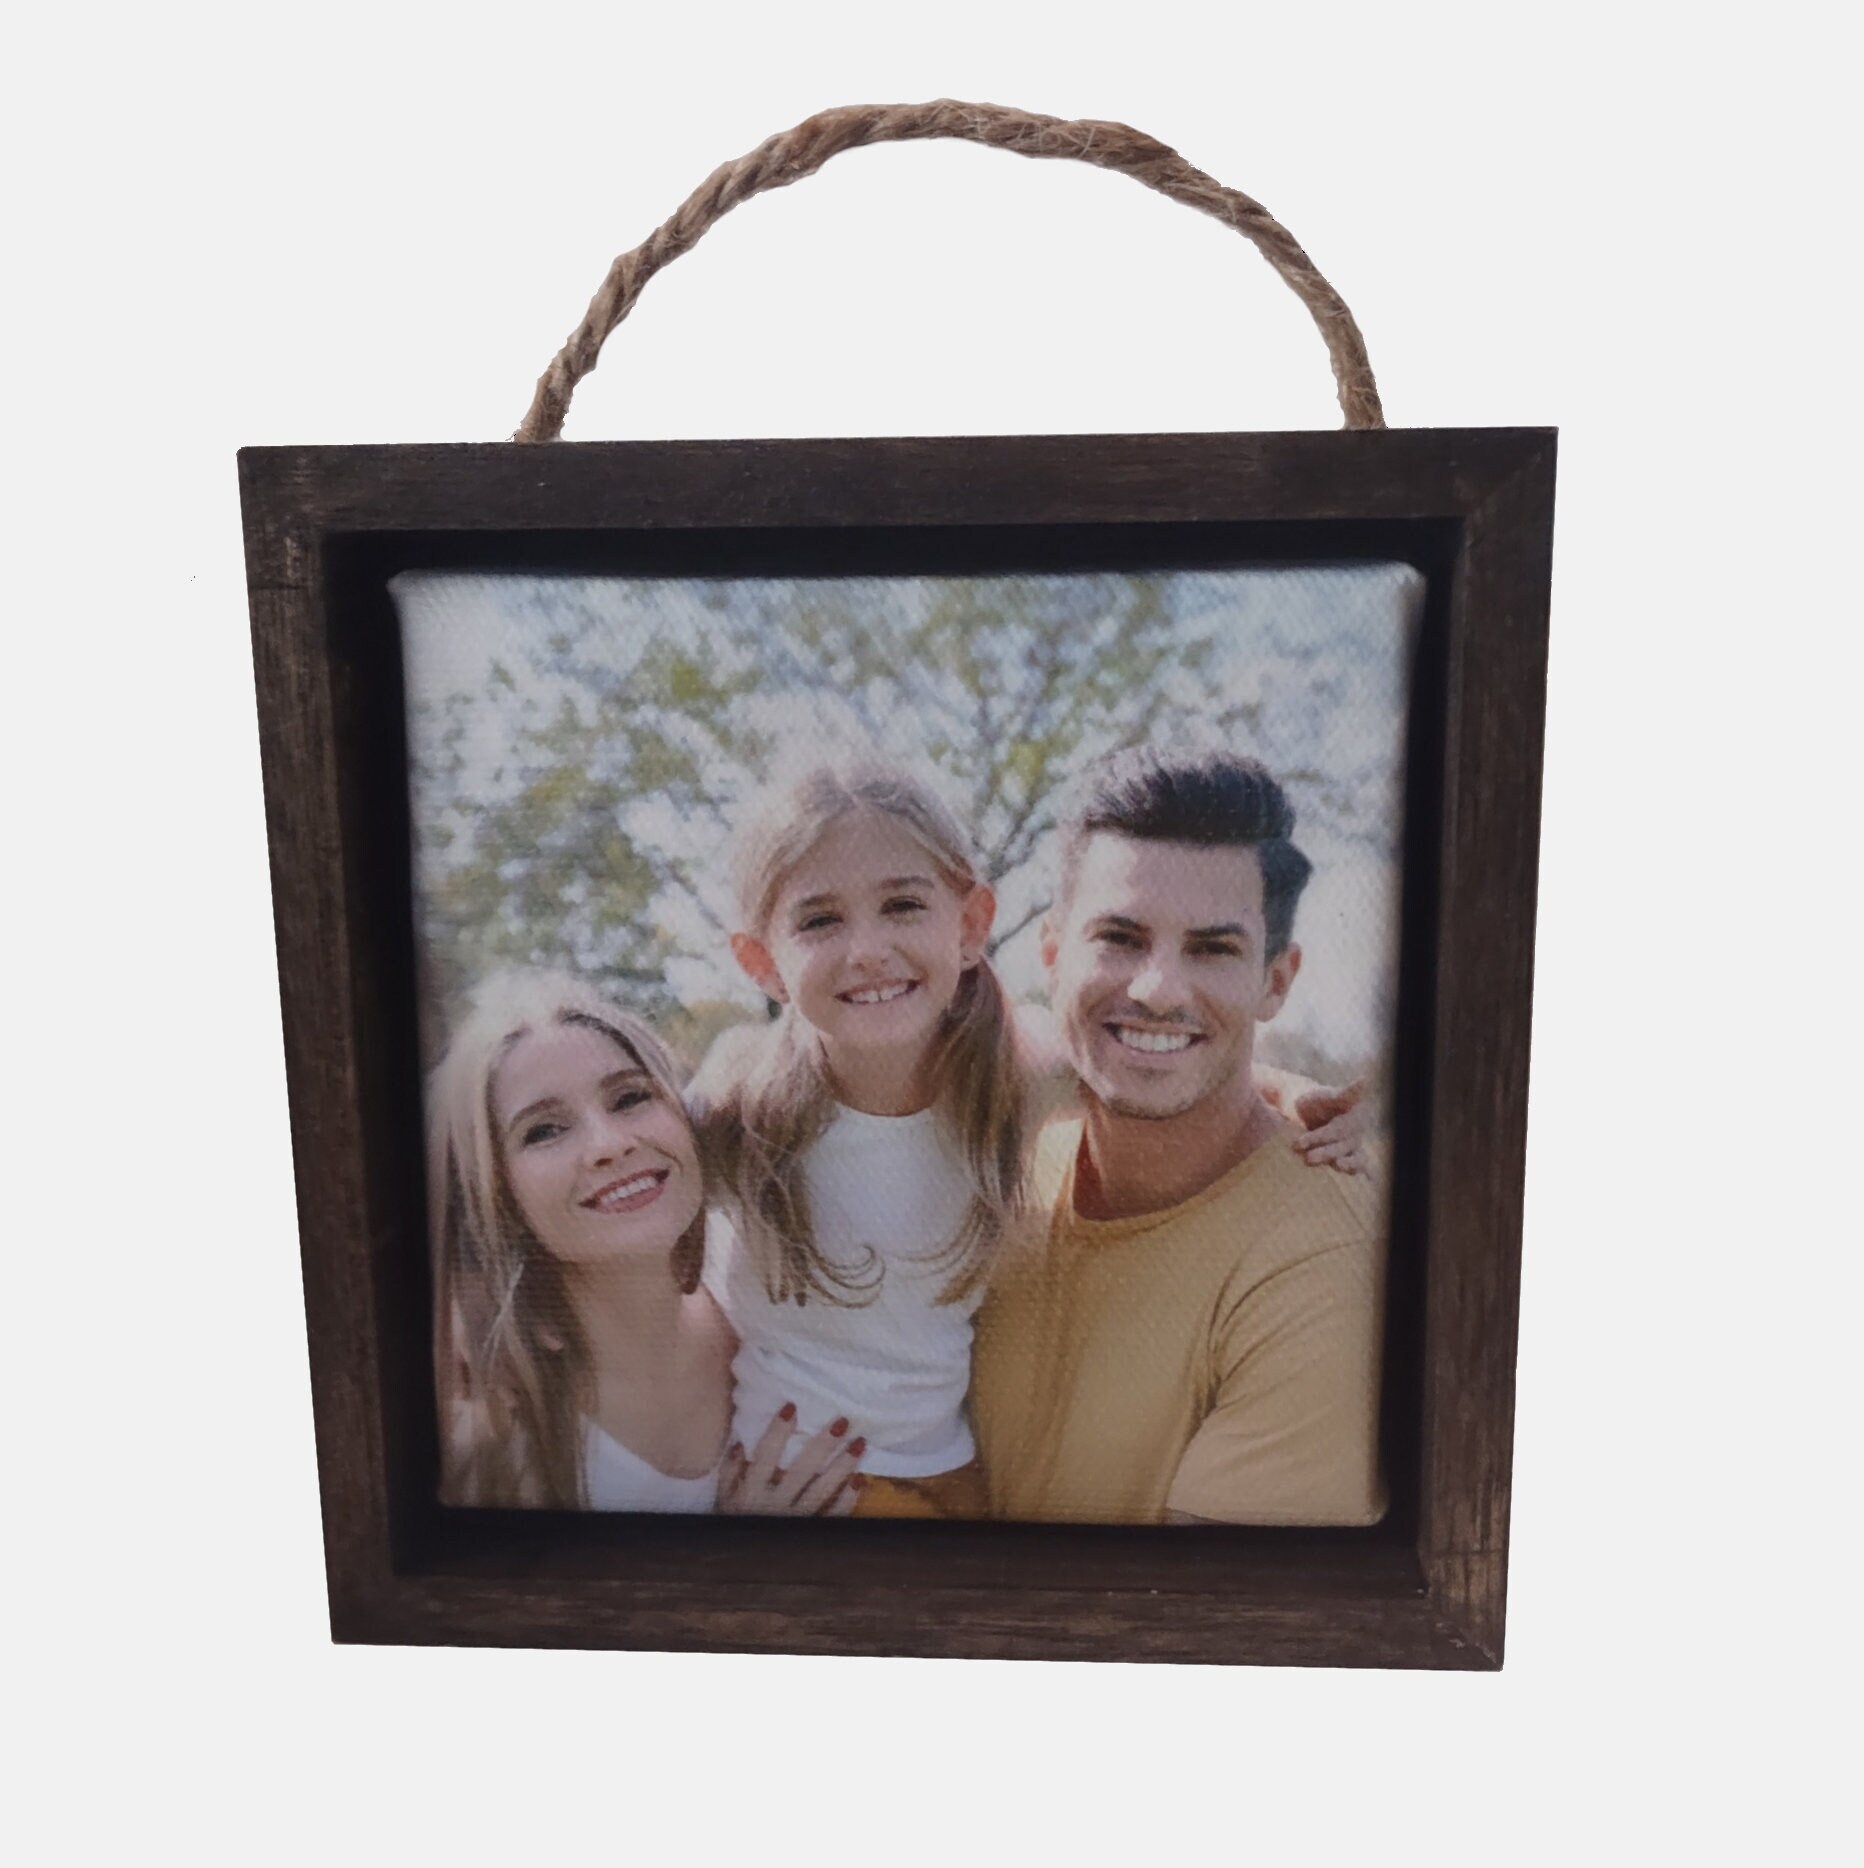 Light Wood Canvas Floater Frames . Painted Stained or Rustic Wood Frames in  Custom Sizes . Fits 3/4 Canvas or Upgrade to 1 1/2 Canvas 